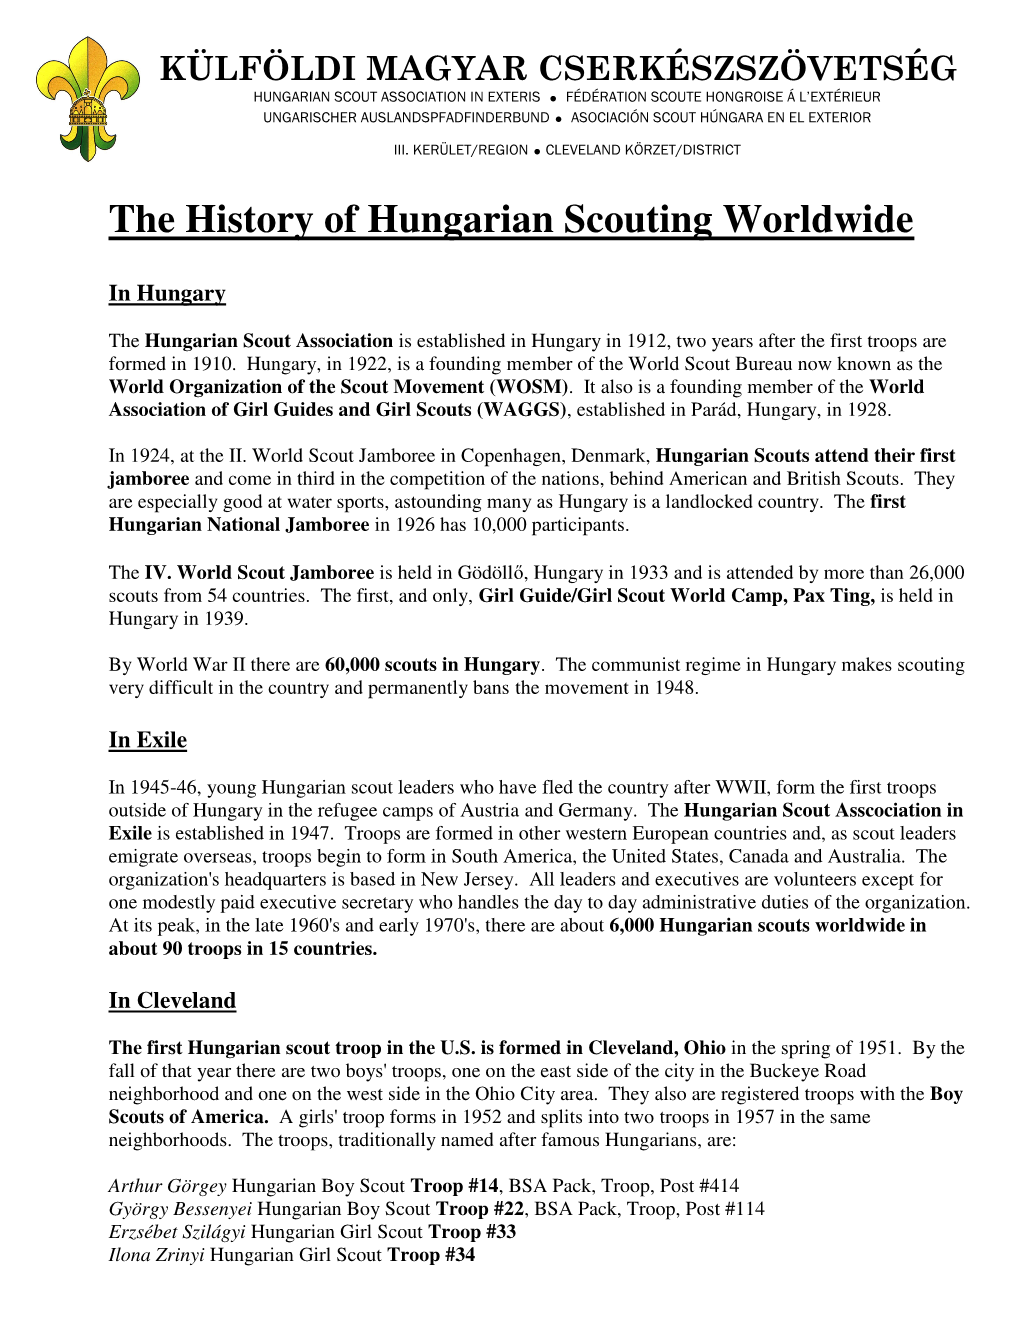 The History of Hungarian Scouting Worldwide